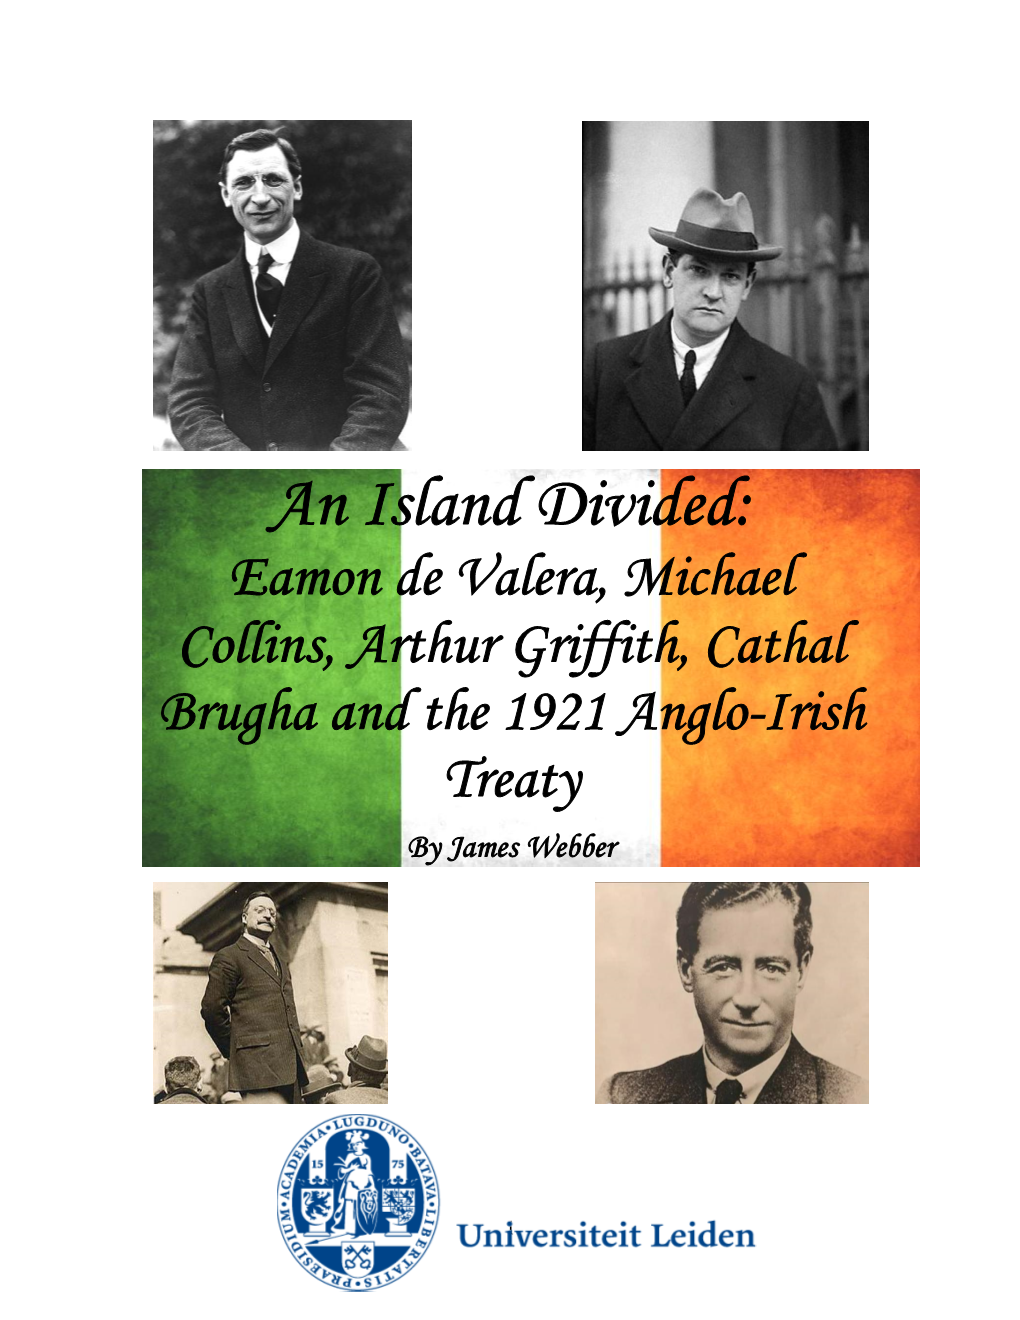 An Island Divided: Eamon De Valera, Michael Collins, Arthur Griffith, Cathal Brugha and the 1921 Anglo-Irish Treaty